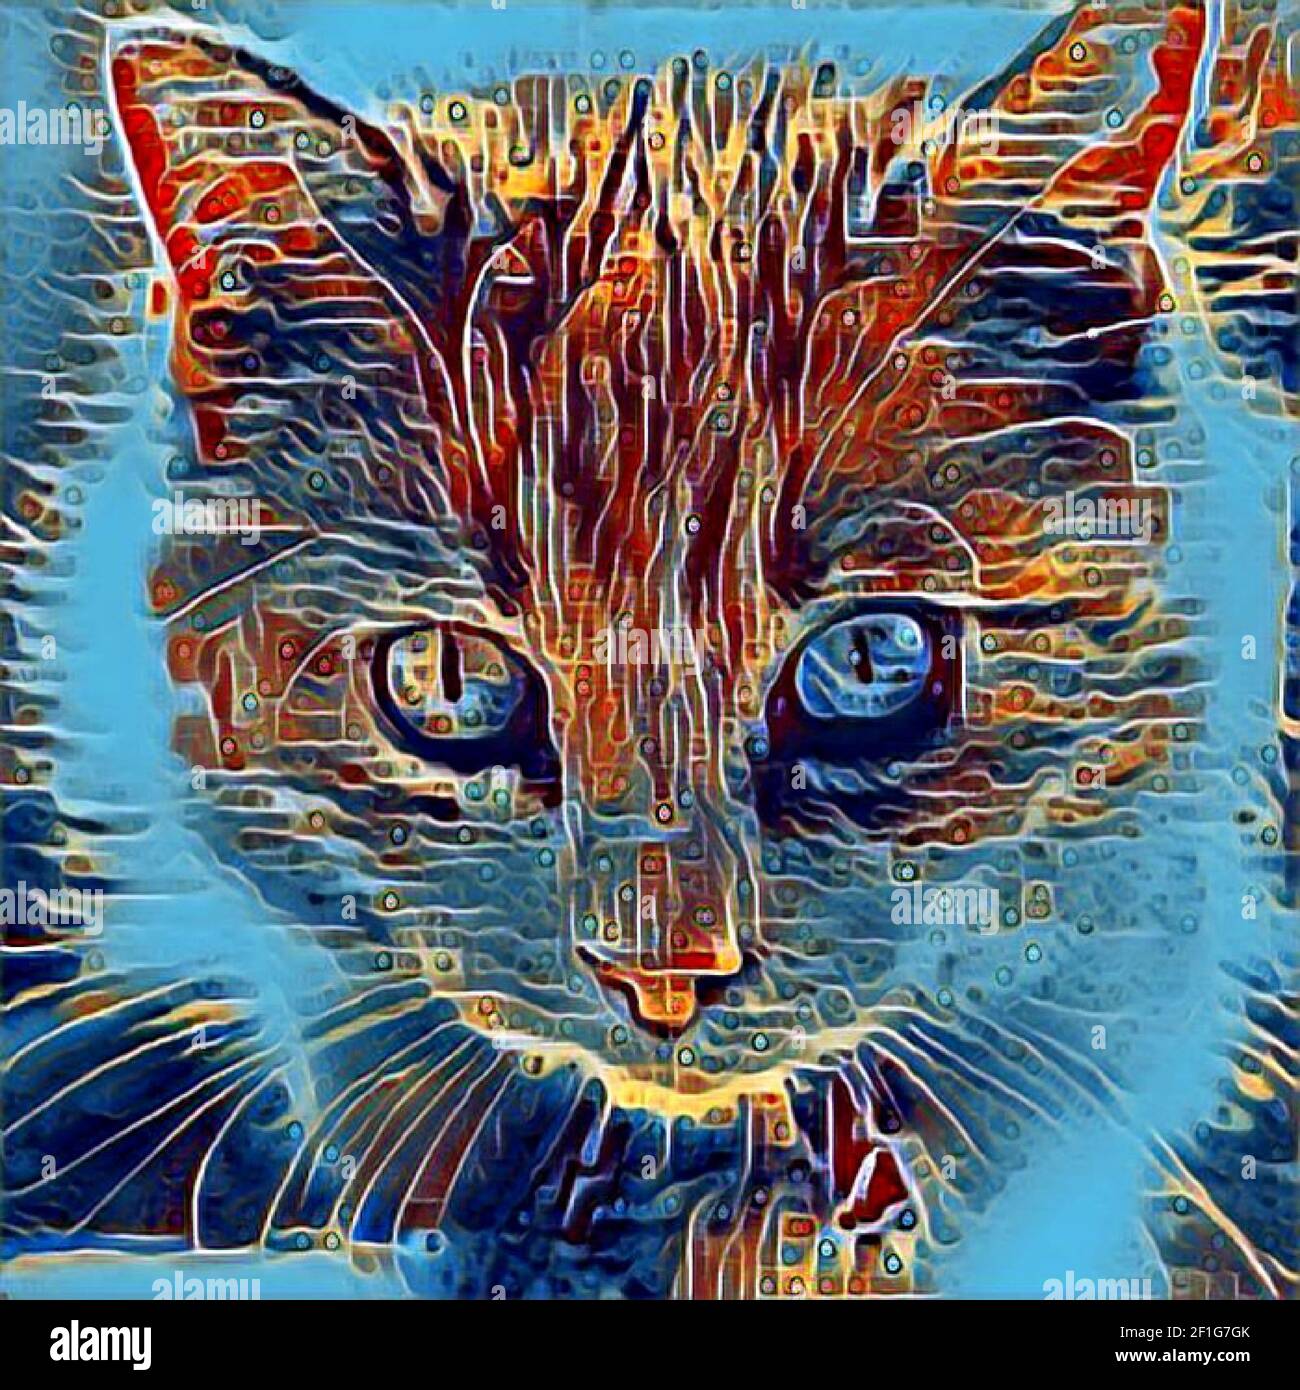 Art Comic Illusstration Style Transfer Deep Learning Artificial ...